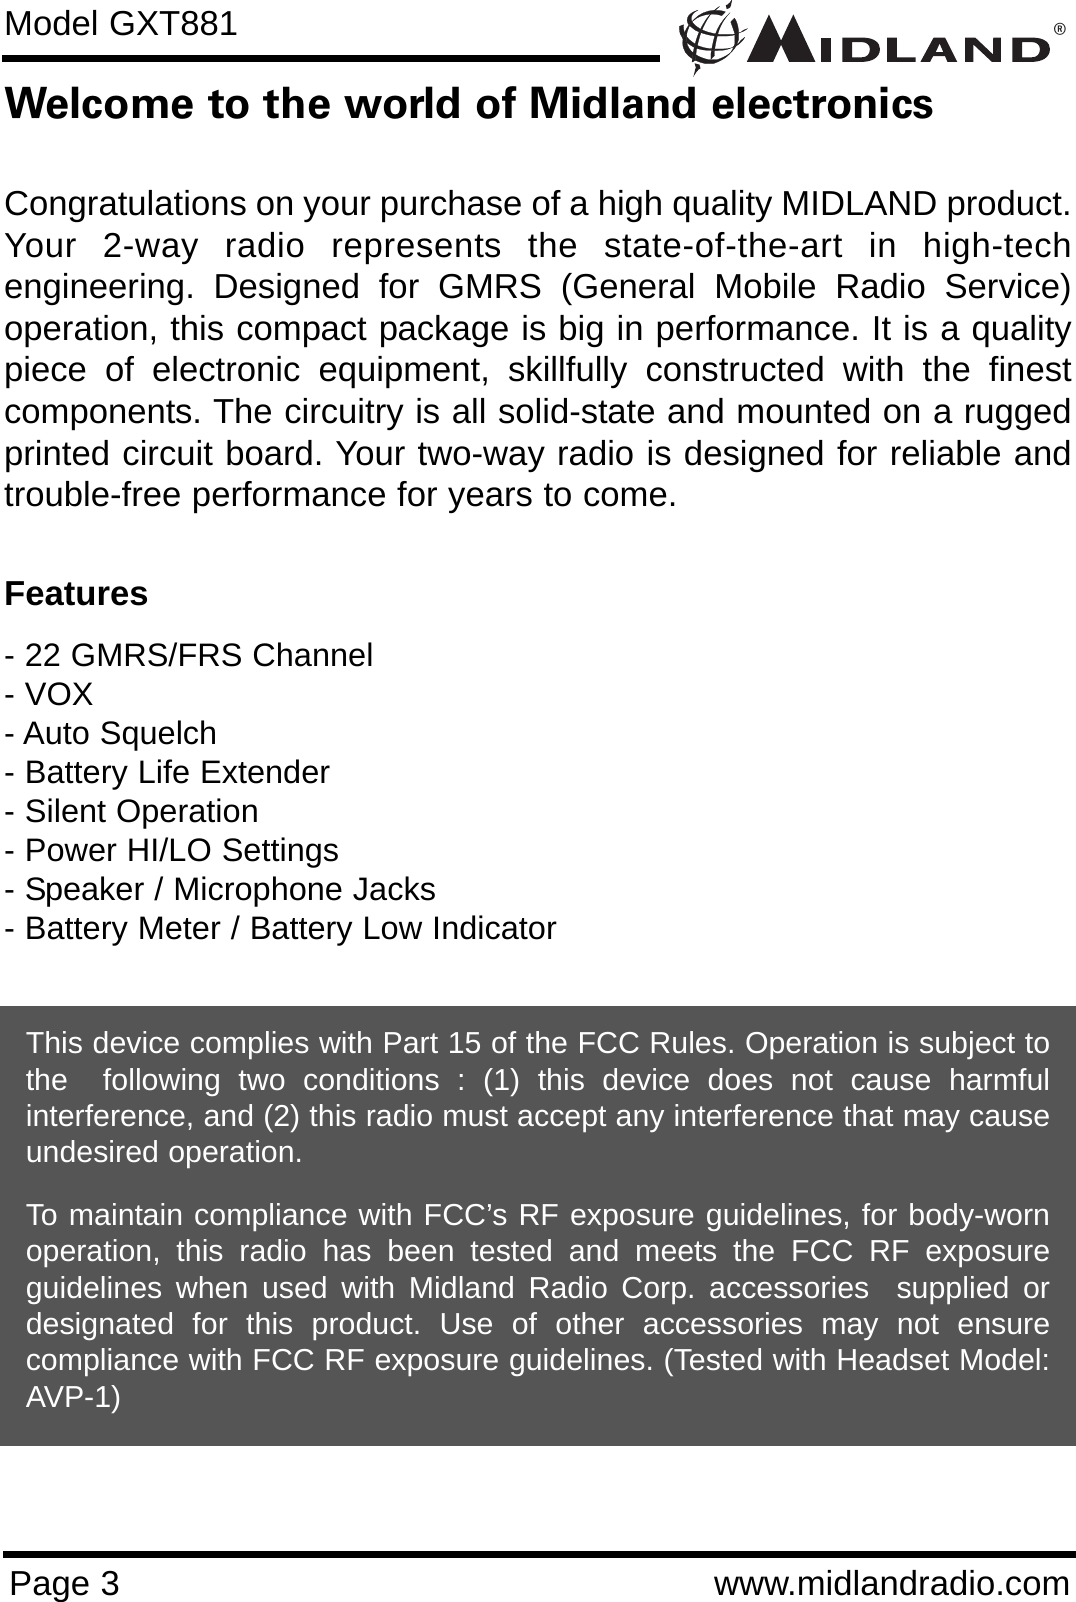 ®Page 3 www.midlandradio.comWelcome to the world of Midland electronicsCongratulations on your purchase of a high quality MIDLAND product.Your 2-way radio represents the state-of-the-art in high-techengineering. Designed for GMRS (General Mobile Radio Service)operation, this compact package is big in performance. It is a qualitypiece of electronic equipment, skillfully constructed with the finestcomponents. The circuitry is all solid-state and mounted on a ruggedprinted circuit board. Your two-way radio is designed for reliable andtrouble-free performance for years to come.Features- 22 GMRS/FRS Channel - VOX- Auto Squelch- Battery Life Extender- Silent Operation- Power HI/LO Settings- Speaker / Microphone Jacks- Battery Meter / Battery Low IndicatorThis device complies with Part 15 of the FCC Rules. Operation is subject tothe  following two conditions : (1) this device does not cause harmfulinterference, and (2) this radio must accept any interference that may causeundesired operation.To maintain compliance with FCC’s RF exposure guidelines, for body-wornoperation, this radio has been tested and meets the FCC RF exposureguidelines when used with Midland Radio Corp. accessories  supplied ordesignated for this product. Use of other accessories may not ensurecompliance with FCC RF exposure guidelines. (Tested with Headset Model:AVP-1)Model GXT881